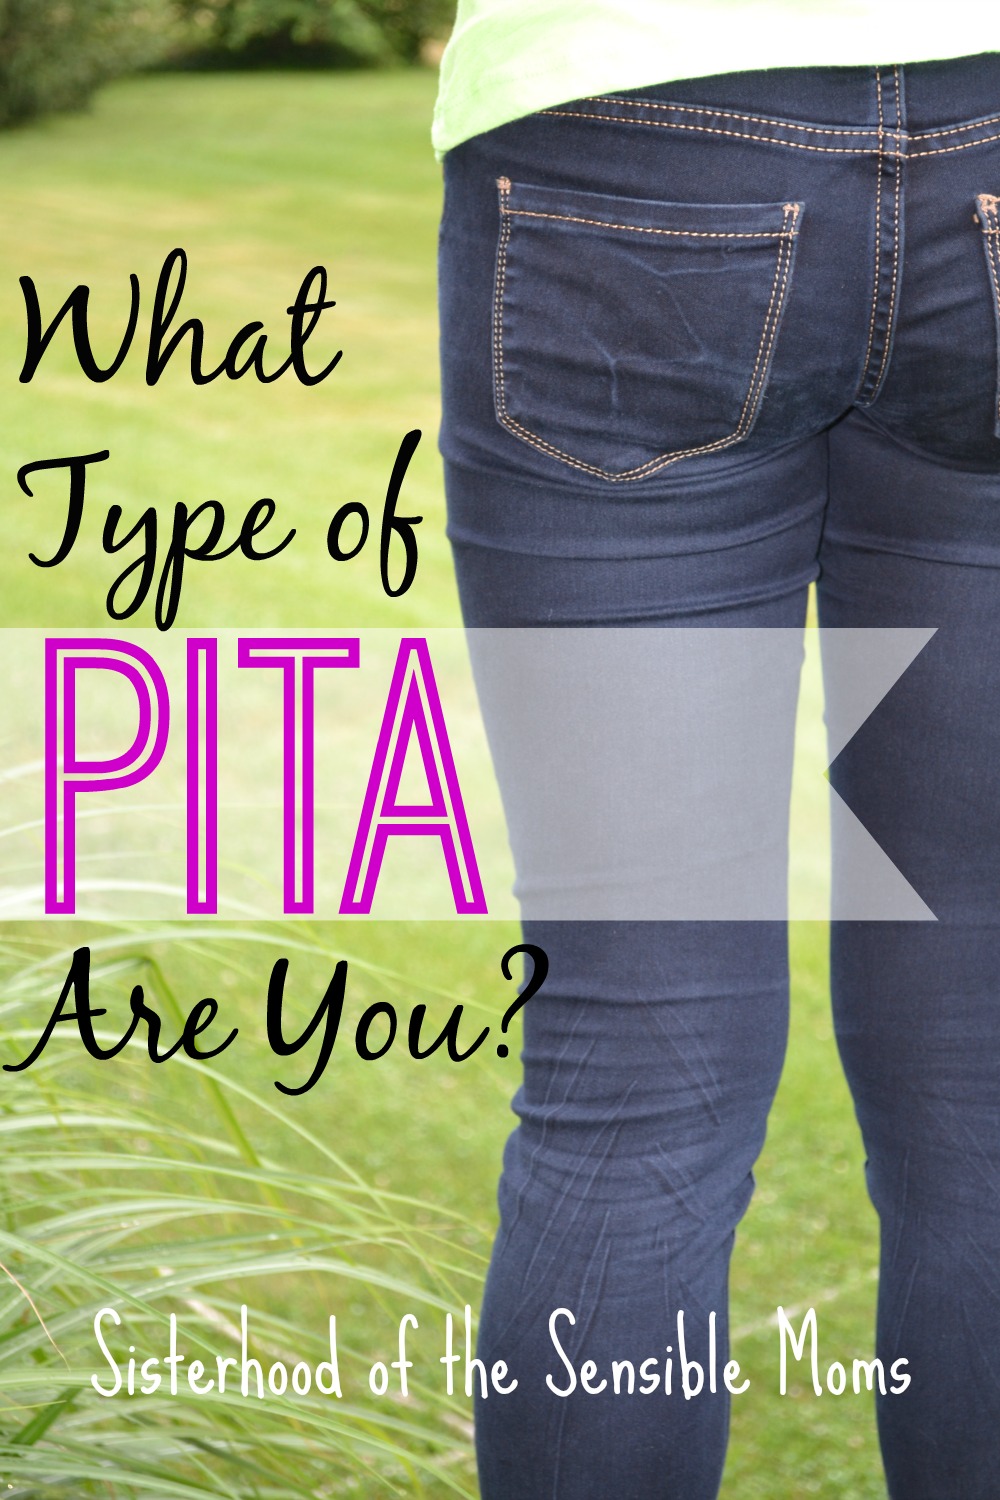 What's a PITA, besides funny fodder? Well, if you have to ask, you might be one of the worst offenders. But anyway, it's "Pain in the A**." No matter how great you are, everyone has that little sliver of their personality that occasionally rears its ugly head and causes much eye rolling. So . . . What Type of PITA Are You? | Humor | Sisterhood of the Sensible Moms